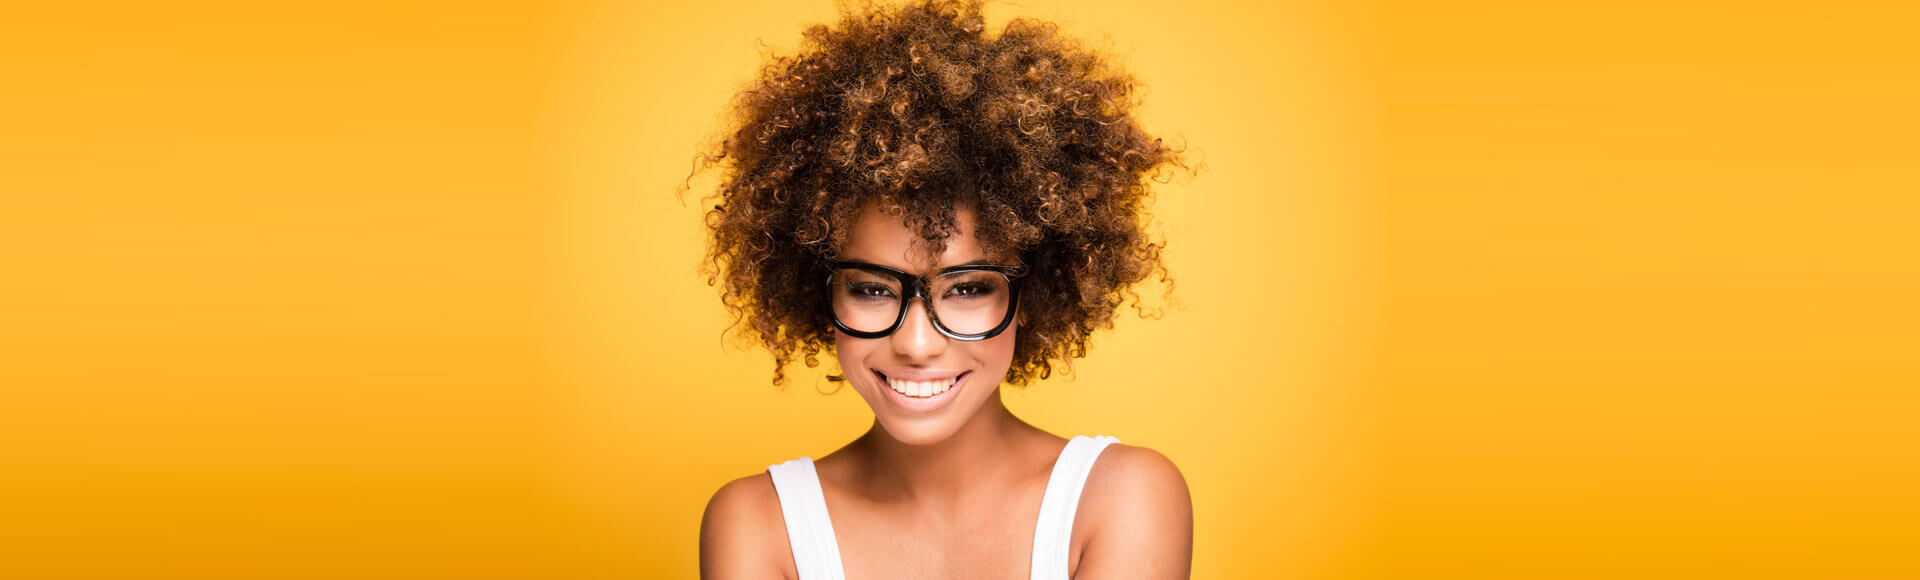 girl-with-glasses